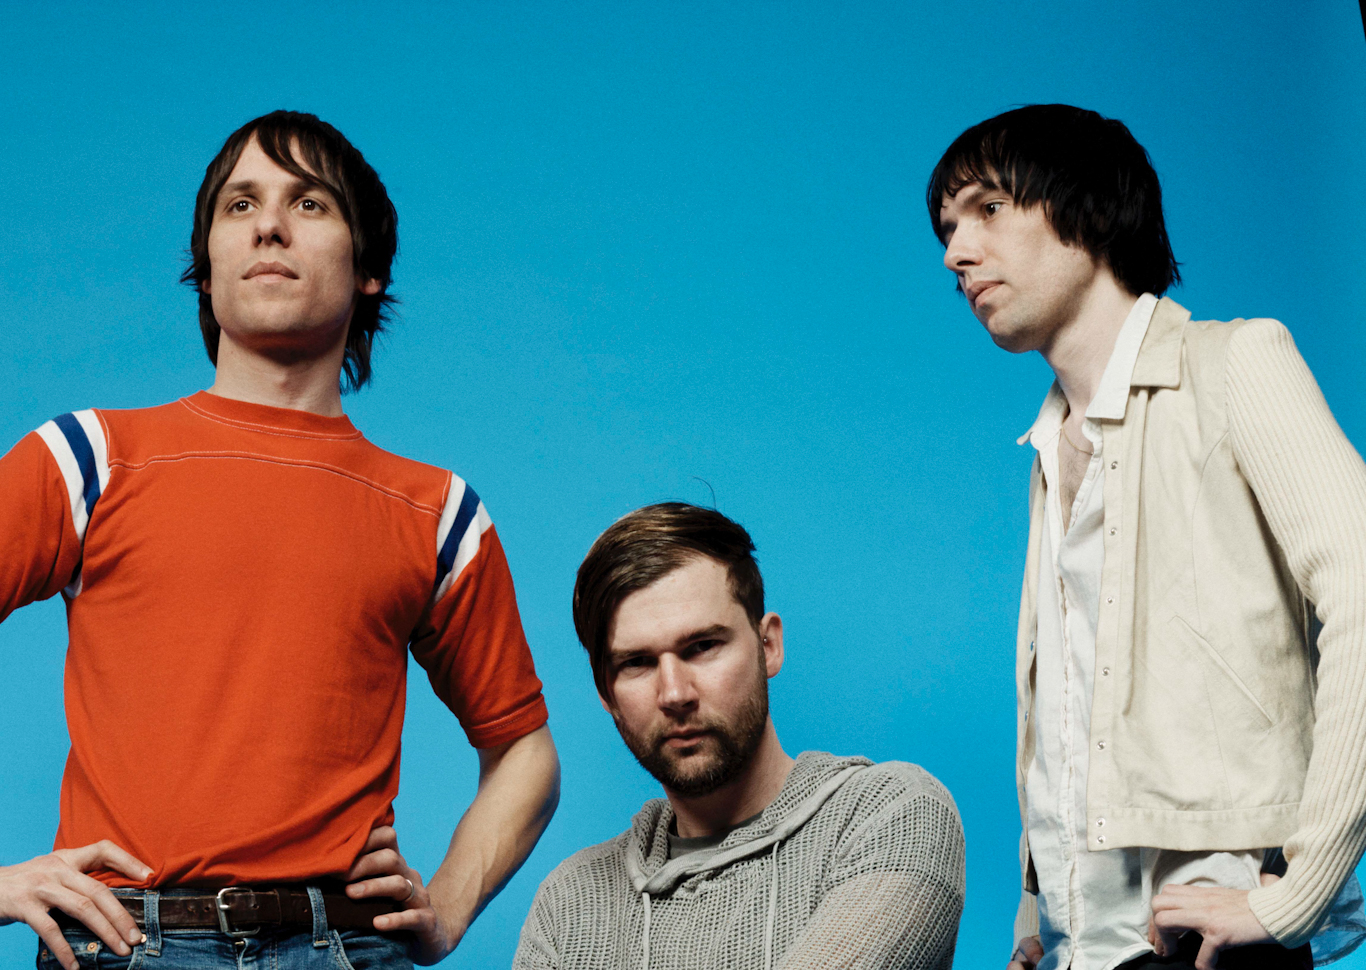 THE CRIBS share the latest release of their ‘Sonic Blew Singles Club’ 